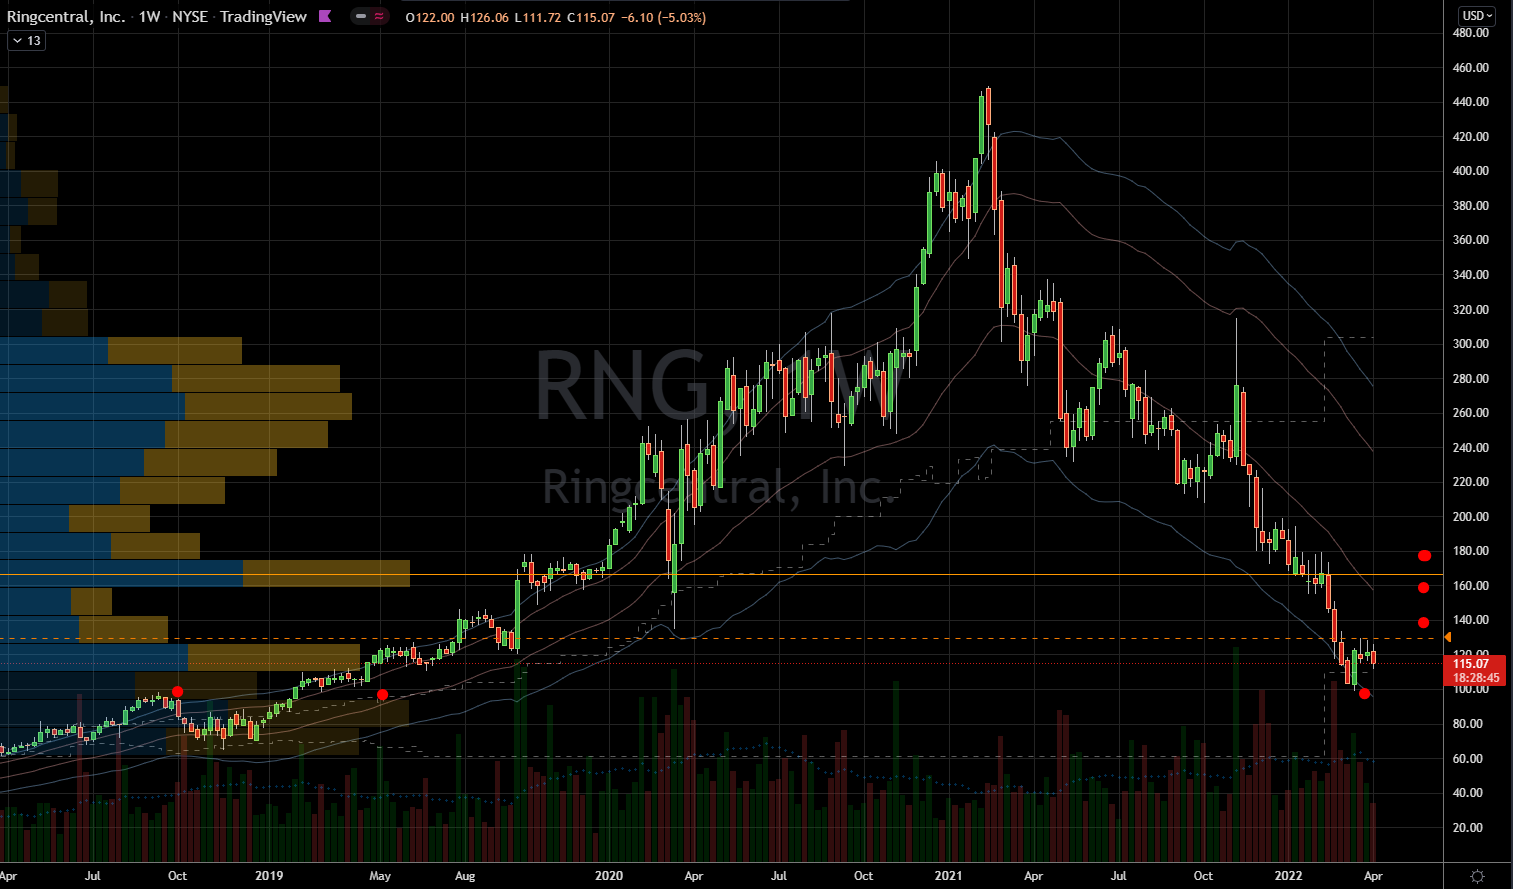 RingCentral (RNG) Stock Chart Showing Upside Potential